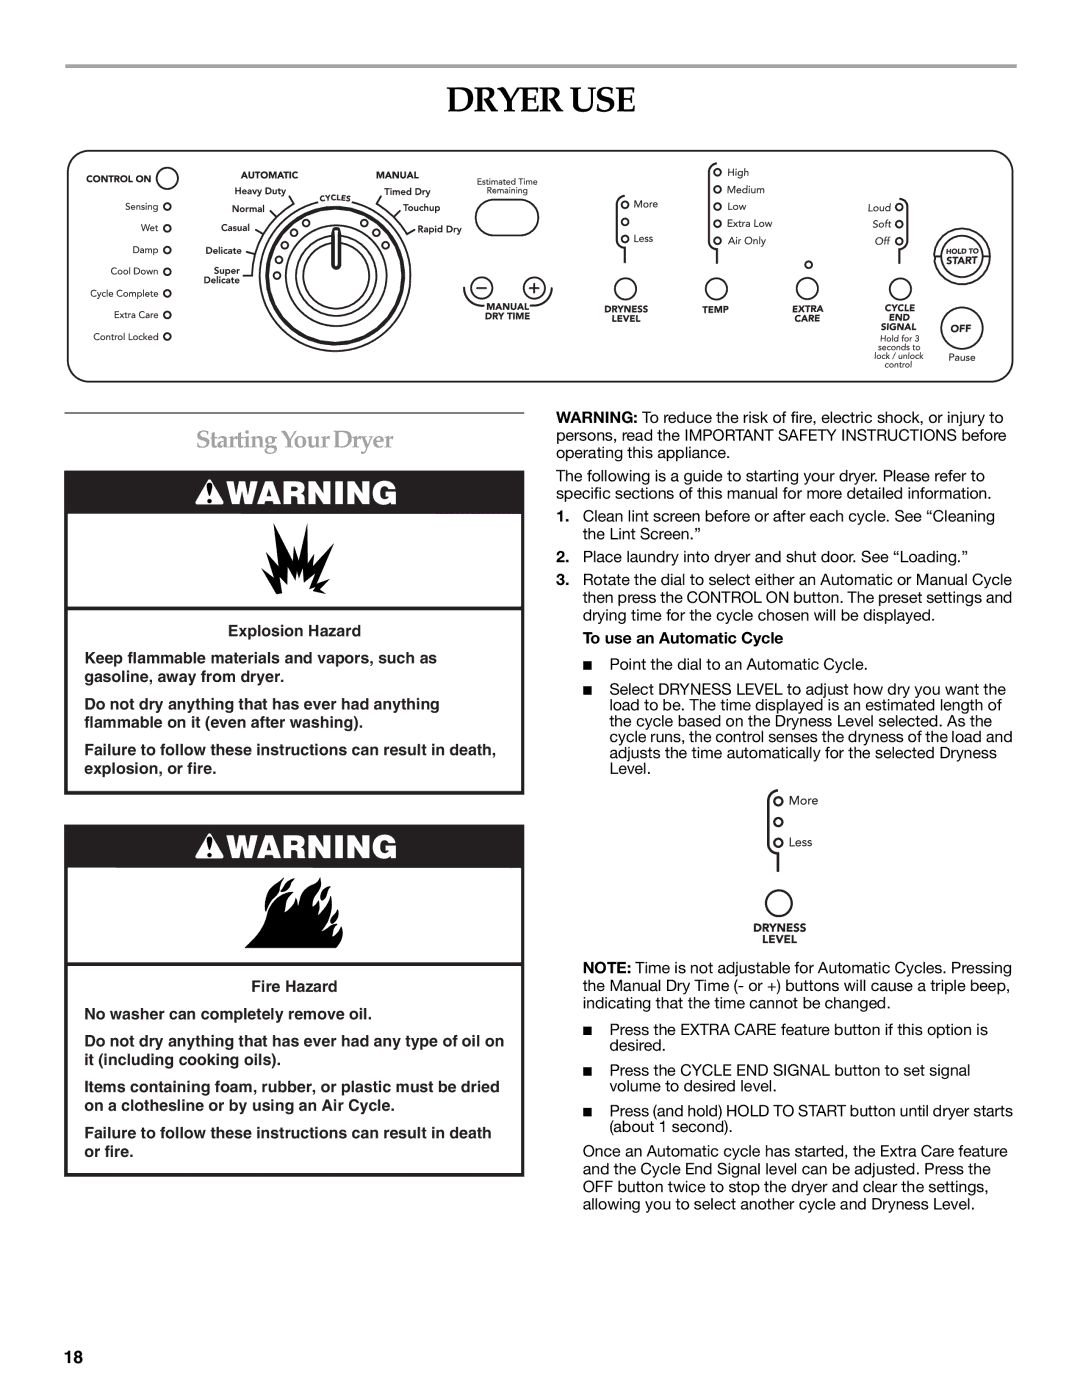 KitchenAid YKEHS01P manual Dryer USE, StartingYour Dryer, To use an Automatic Cycle 